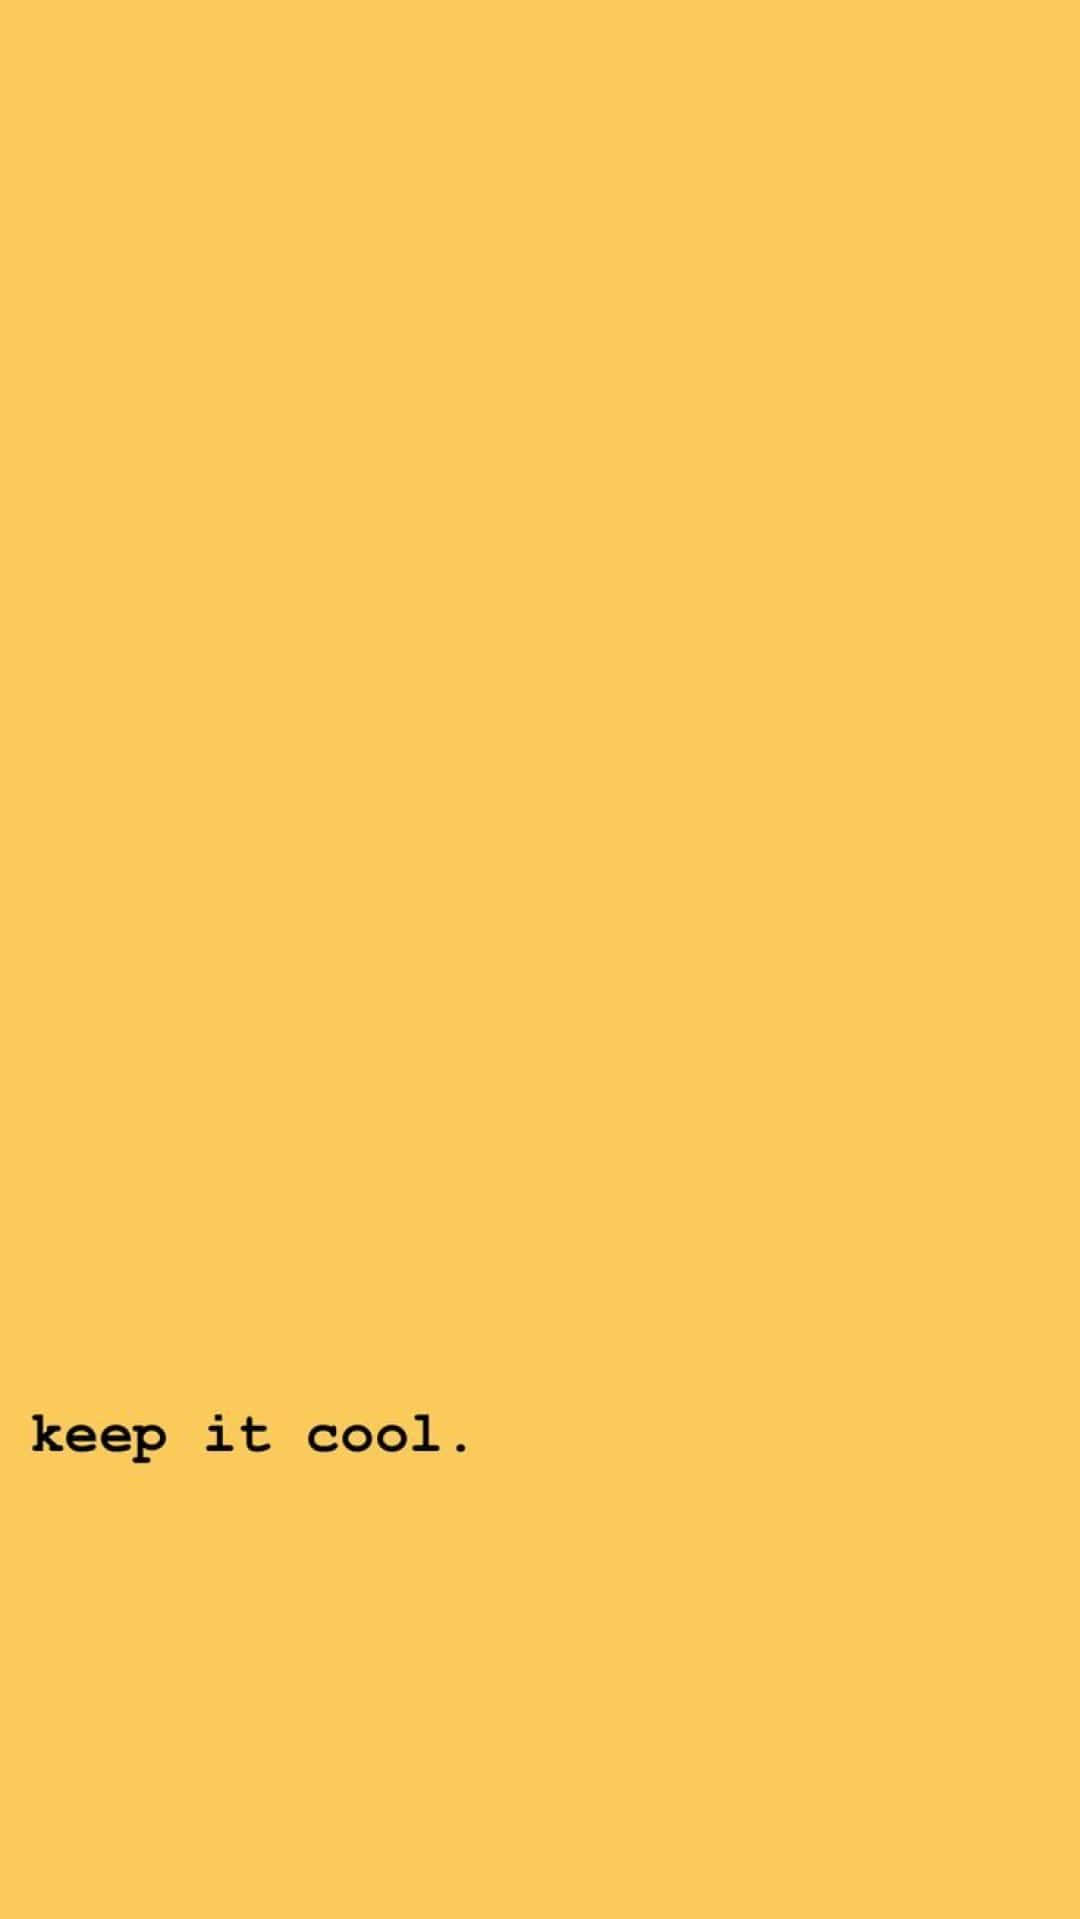 Keep It Cool Background